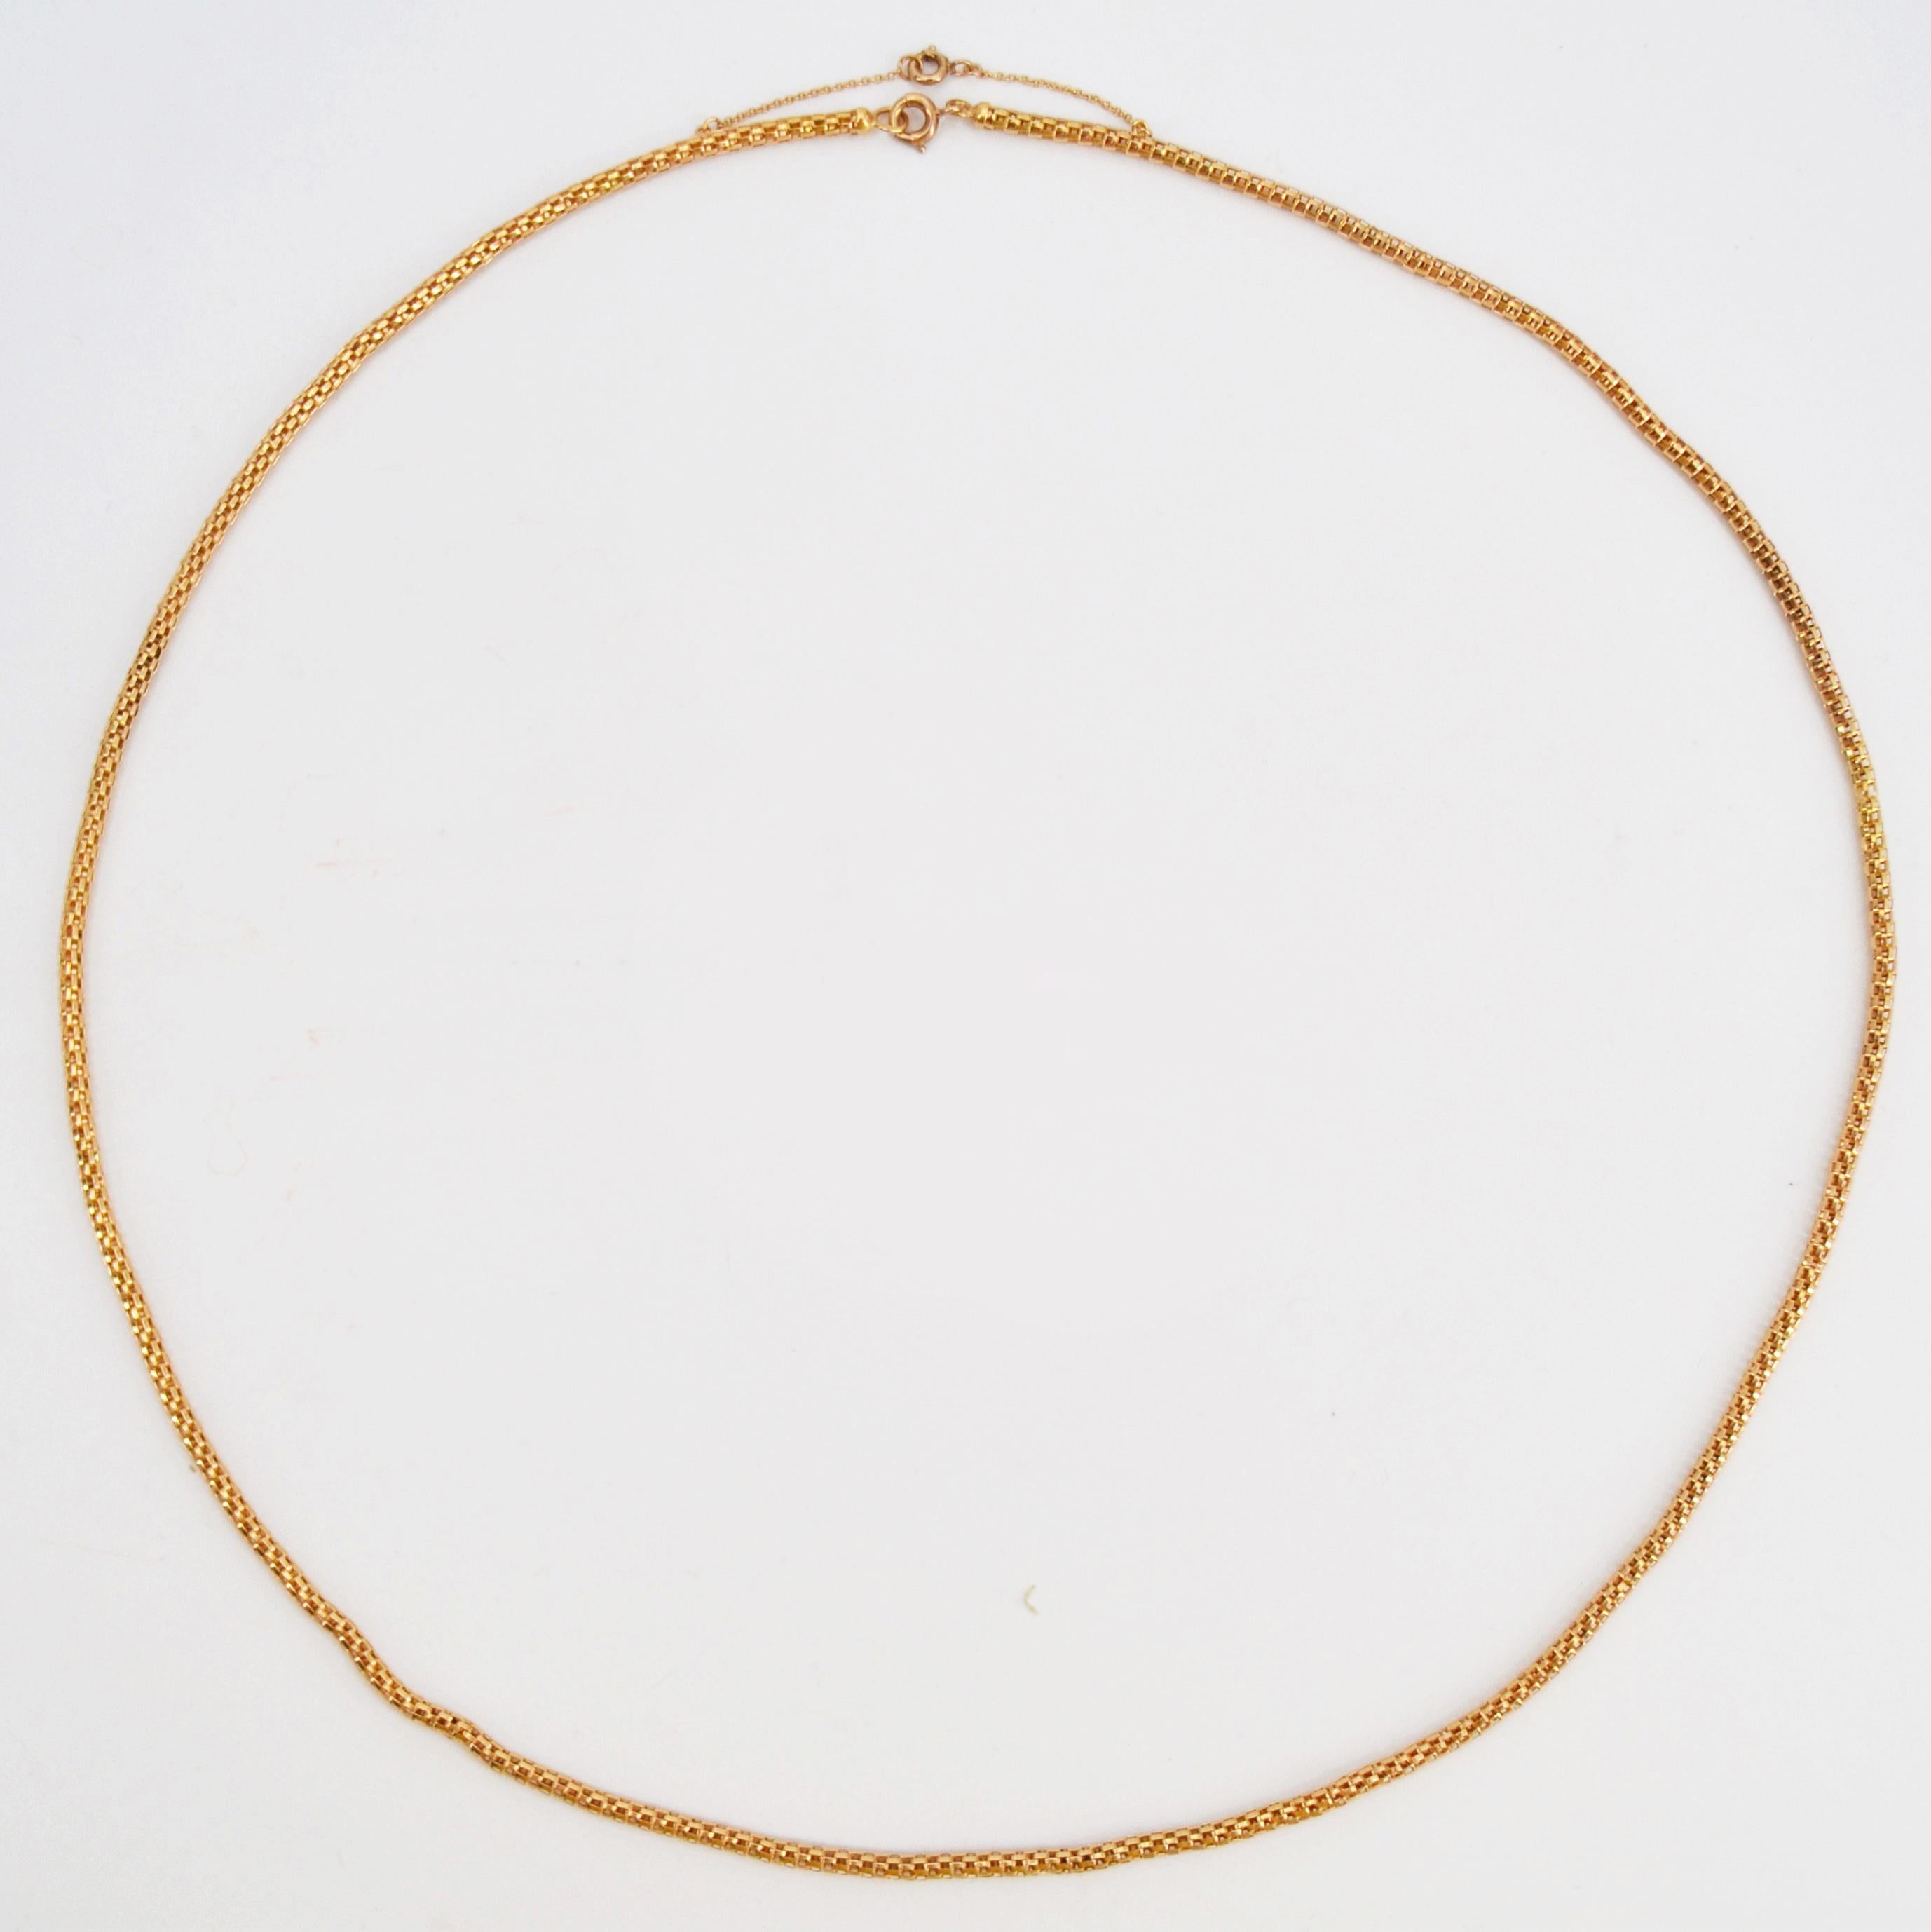 Modern 18 Karat Yellow Gold Snake Mesh Chain In Excellent Condition For Sale In Poitiers, FR